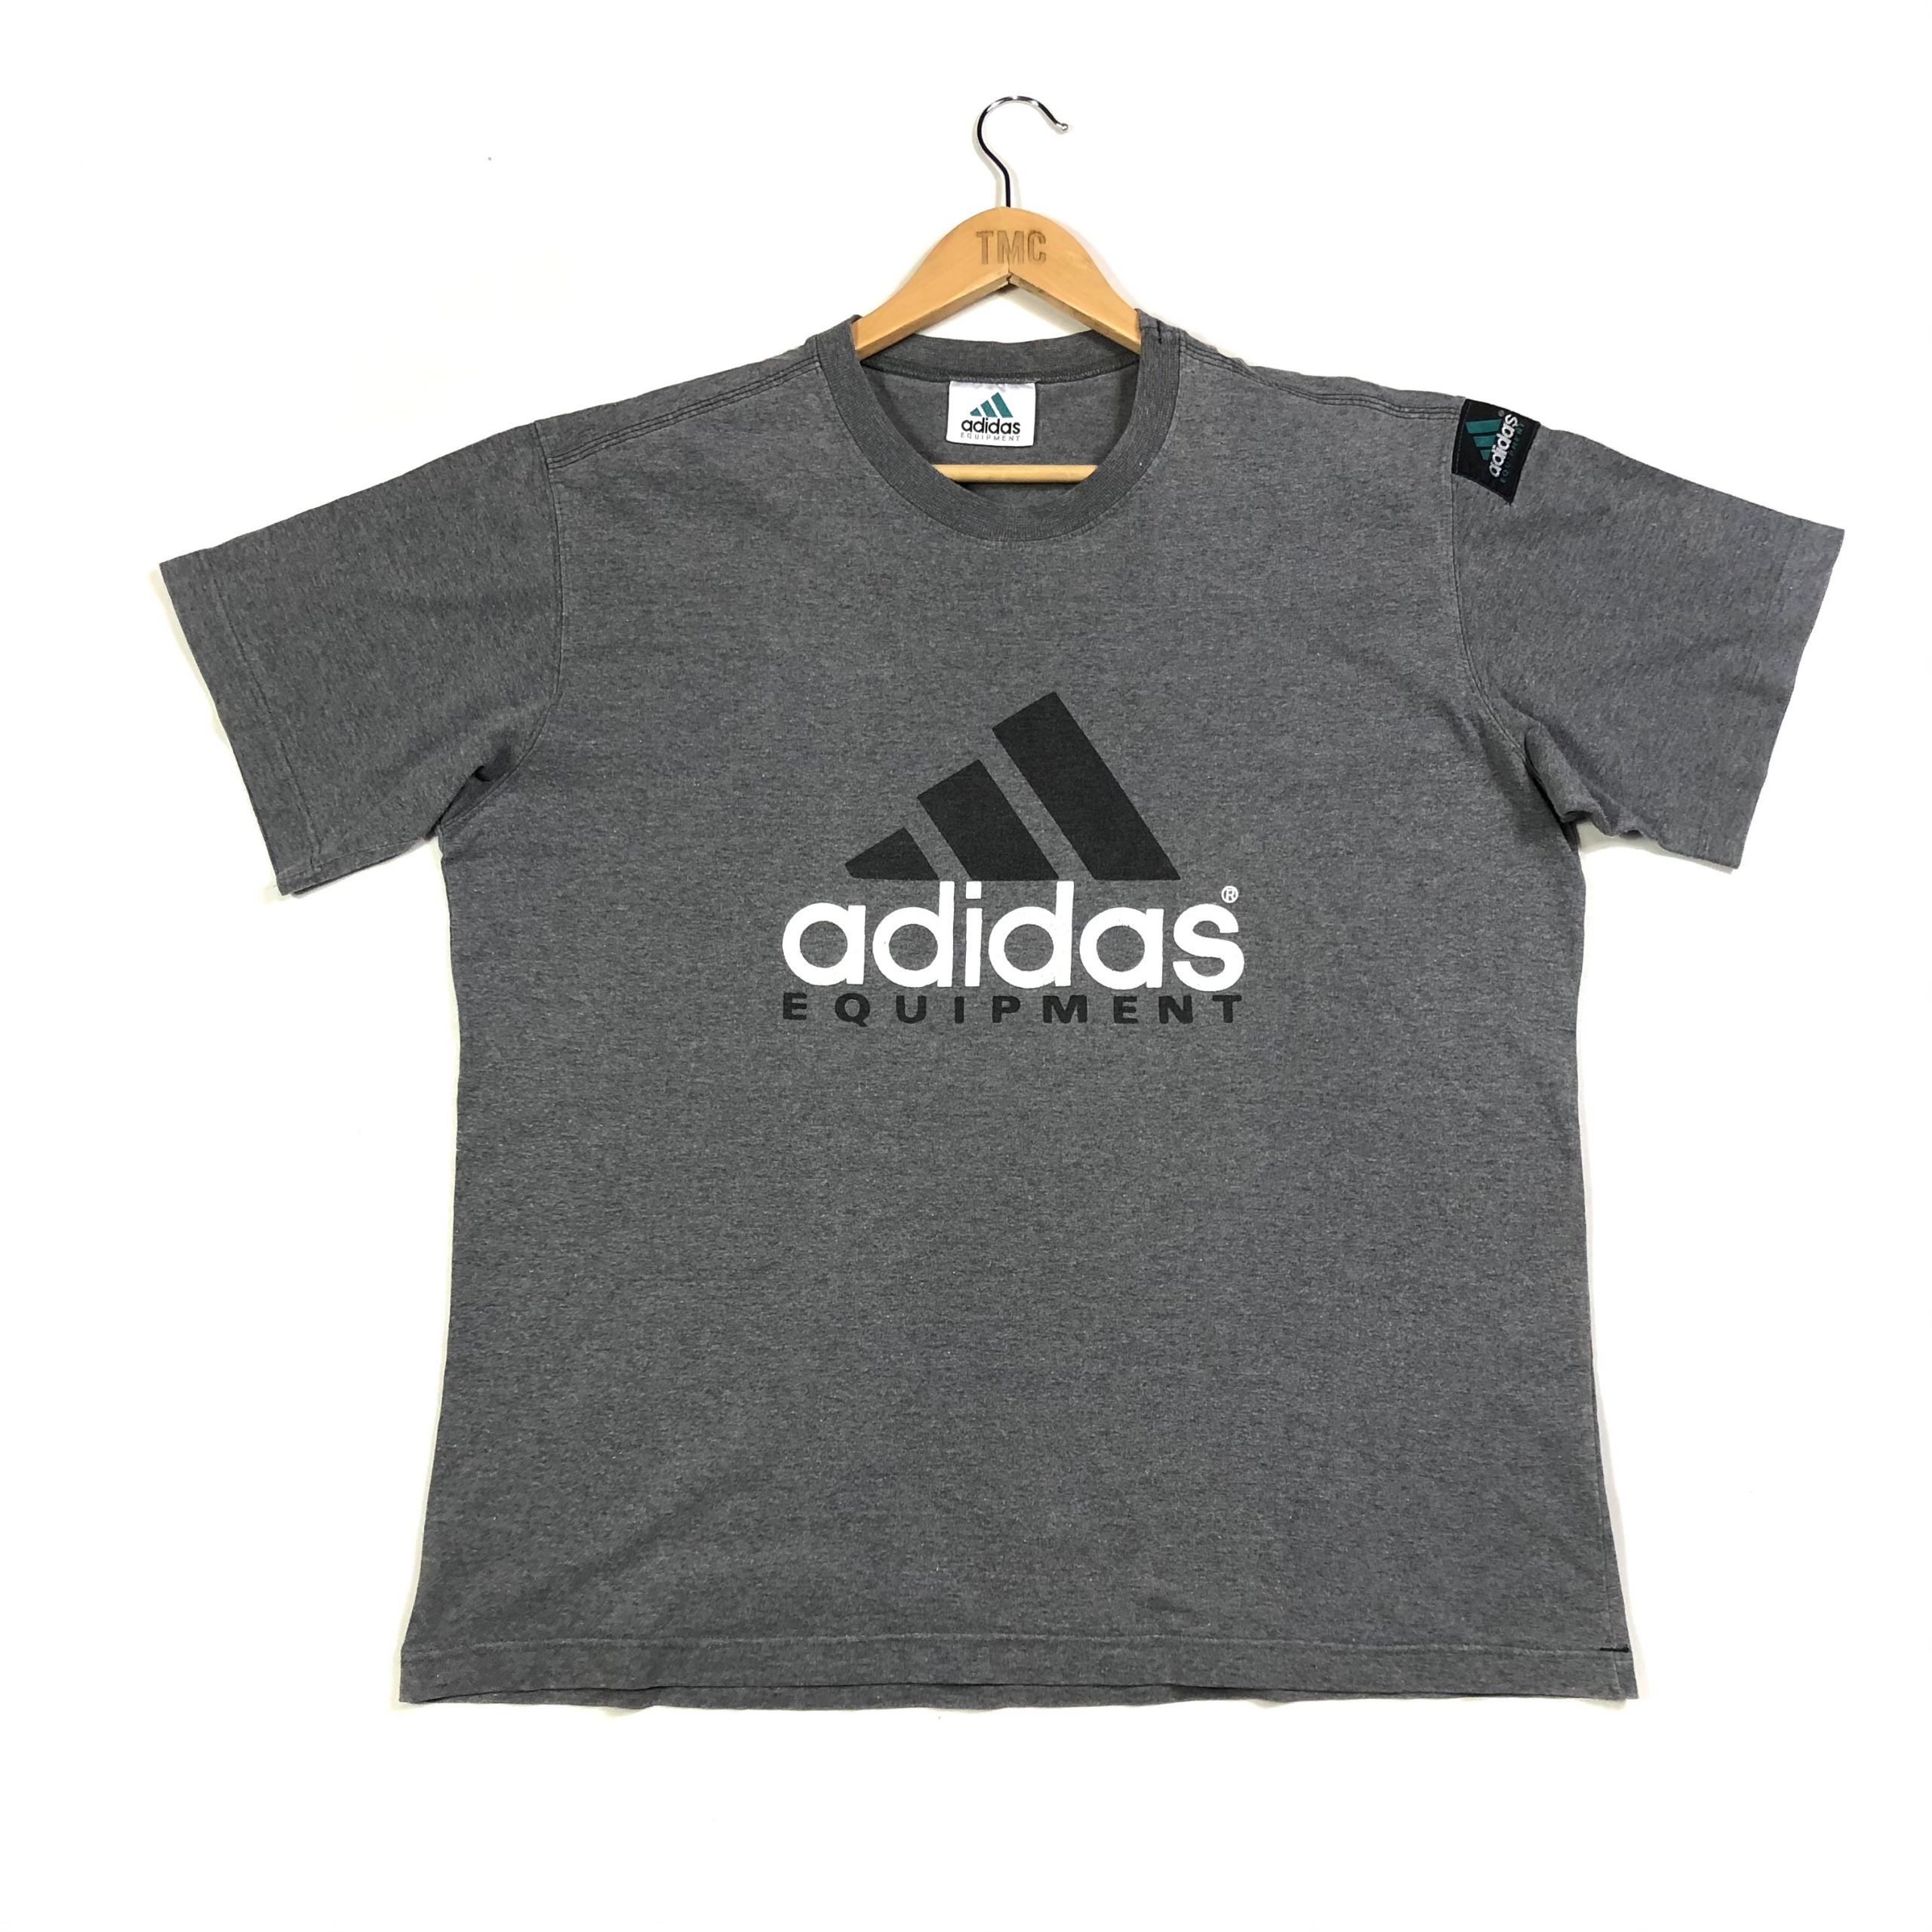 Adidas Equipment Spell Out T-Shirt - Grey - XL - TMC Vintage - Vintage ...